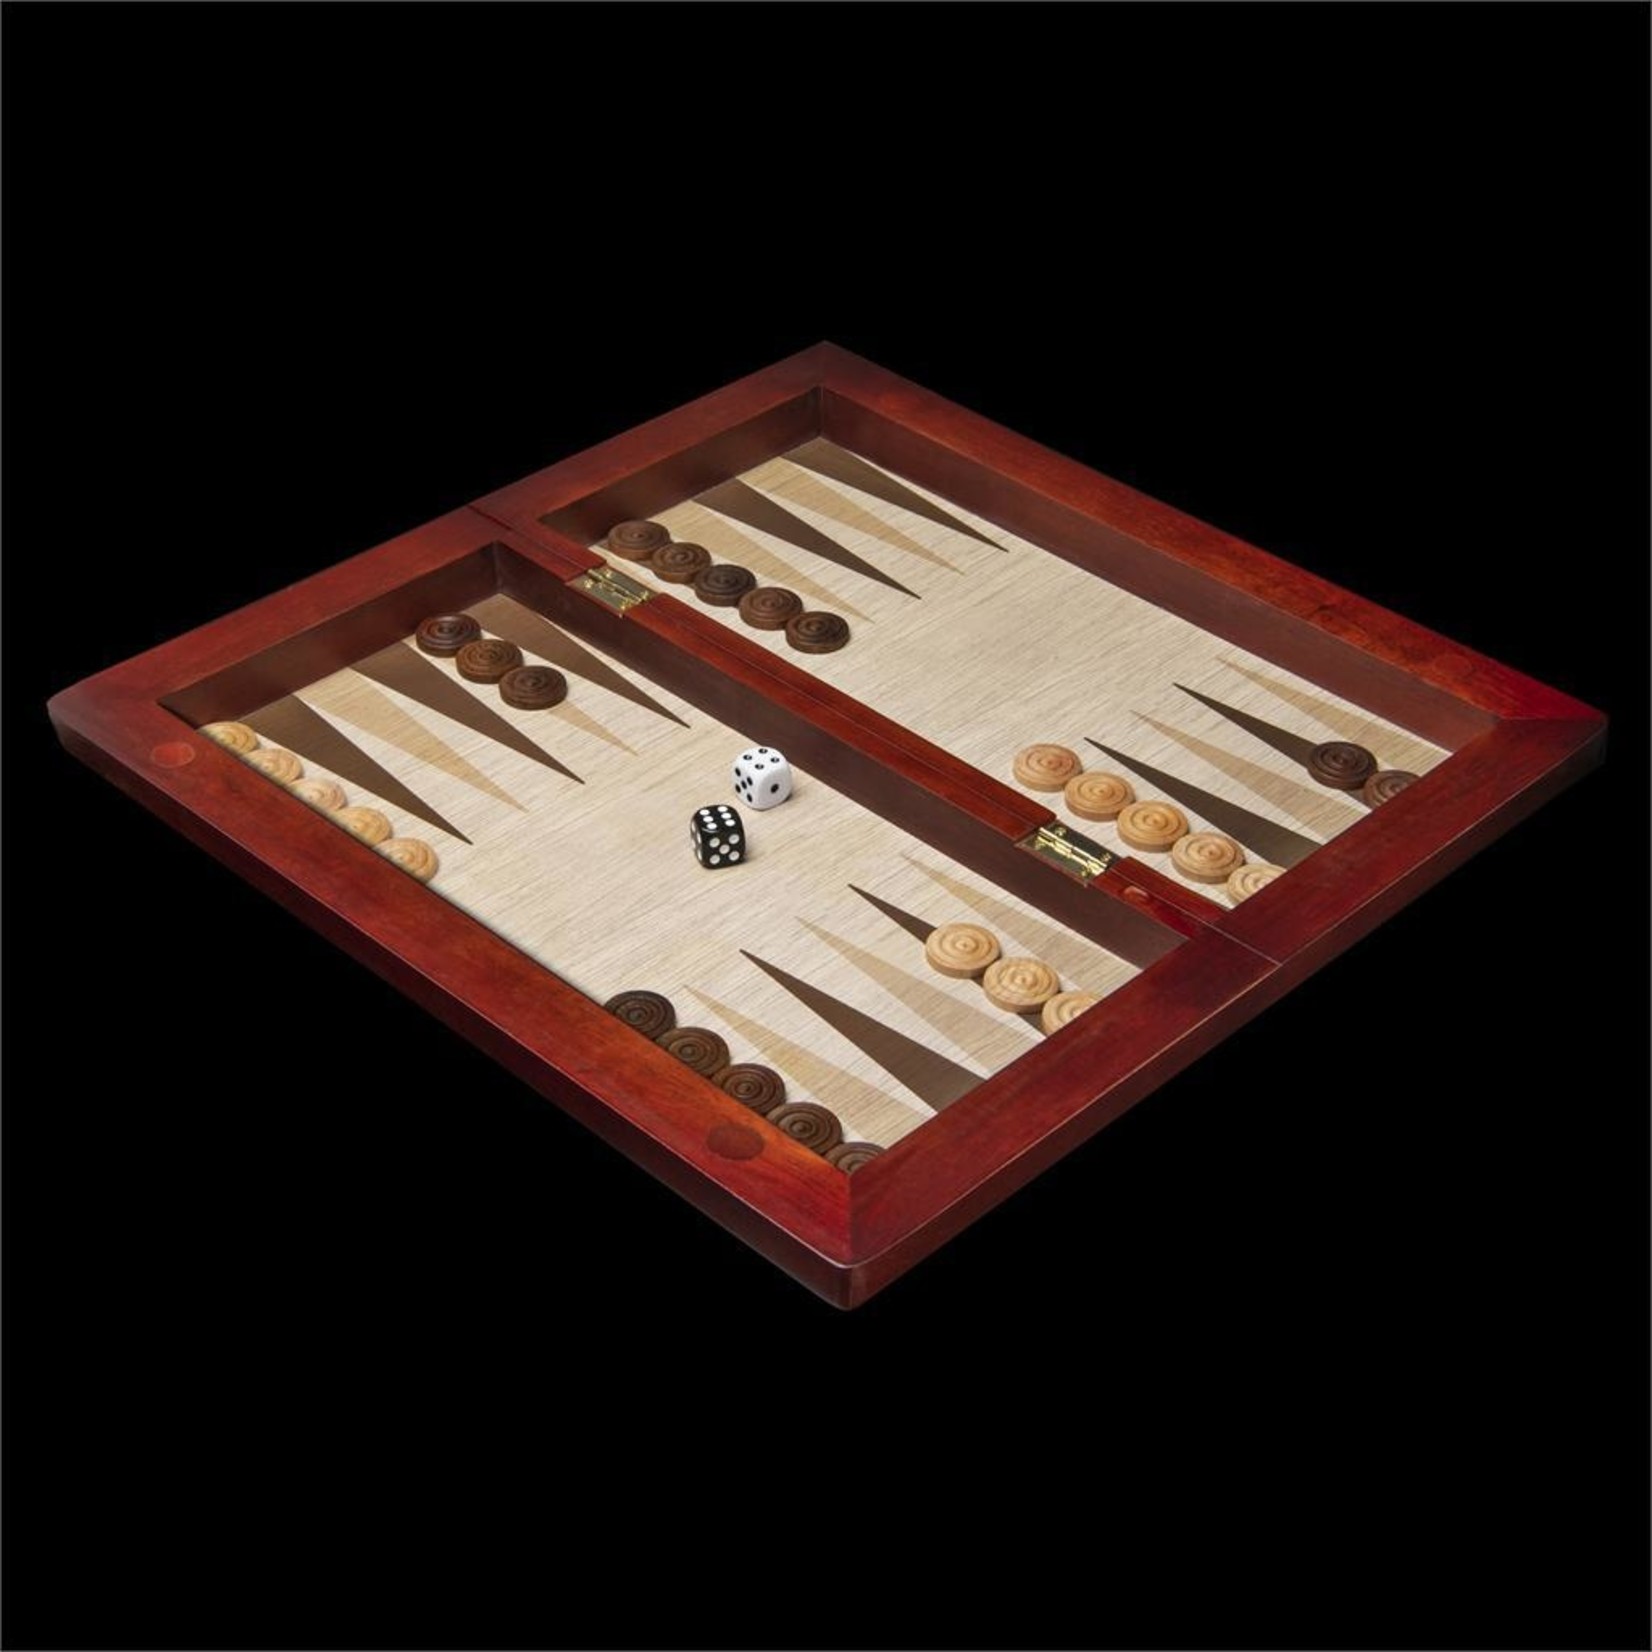 Spinmaster Chess, Checkers, and Backgammon Set